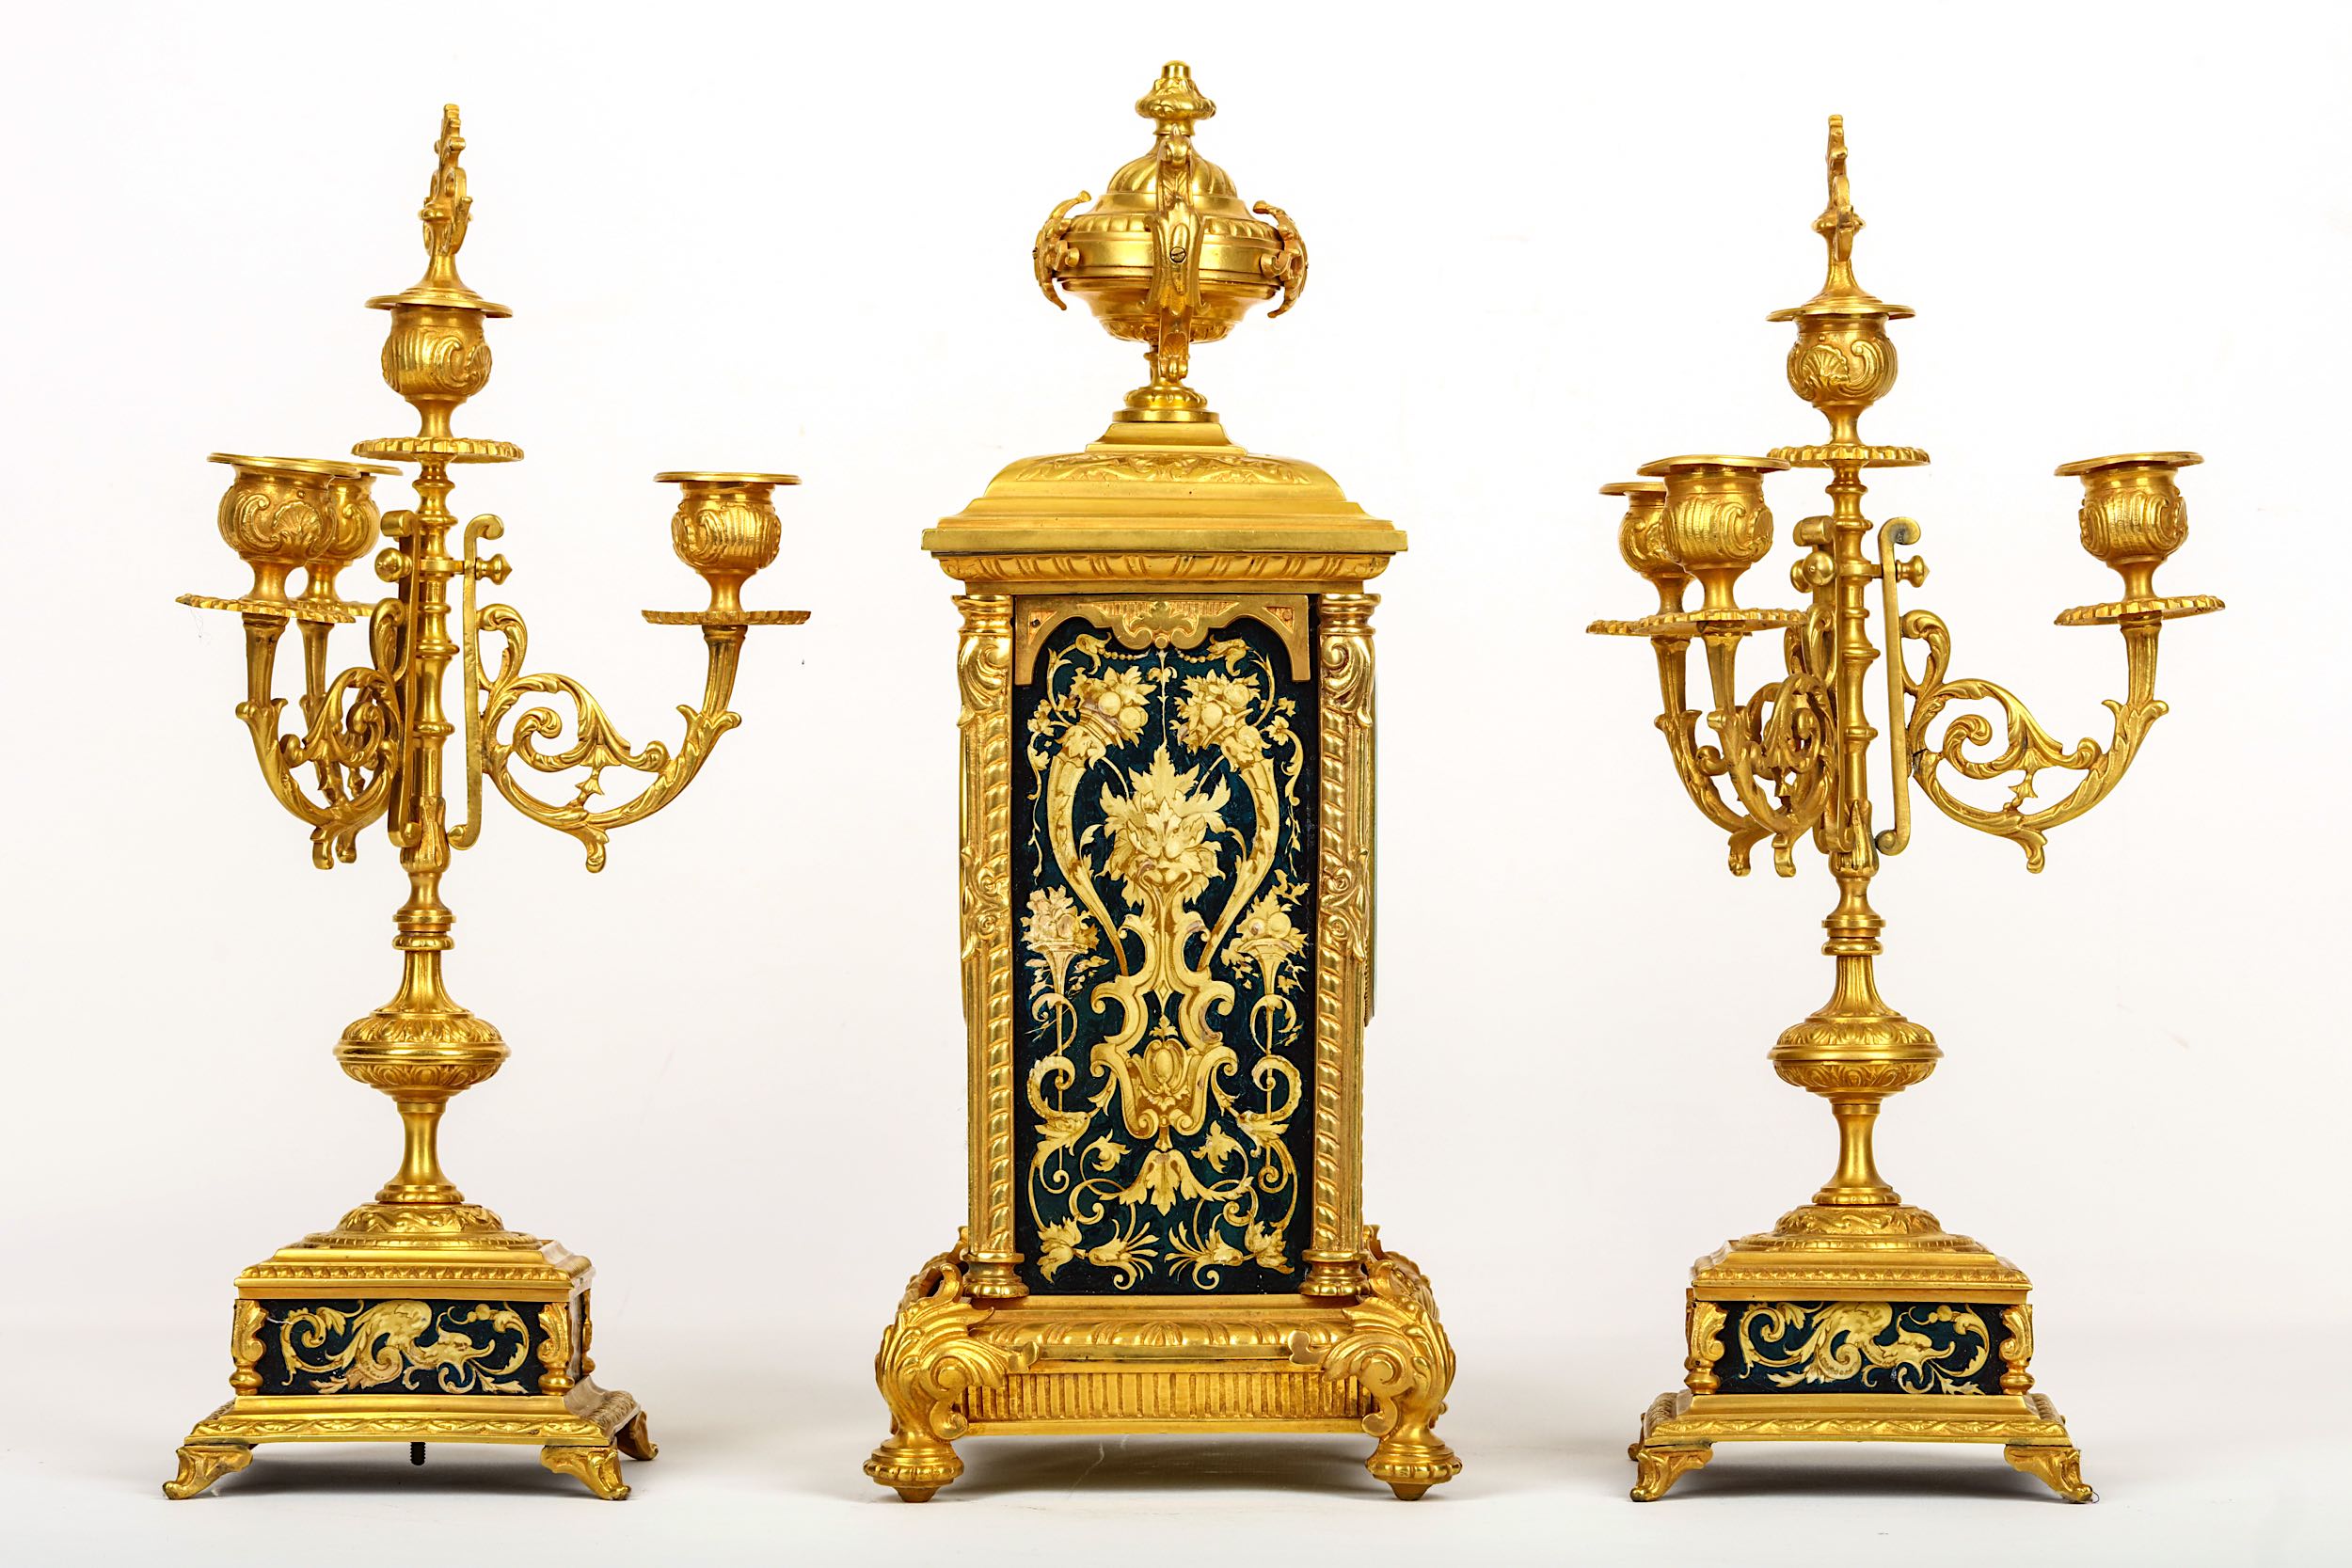 A LATE 19TH CENTURY FRENCH GILT BRONZE AND TOLE PEINTRE CLOCK GARNITURE IN THE RENAISSANCE REVIVAL S - Image 2 of 4